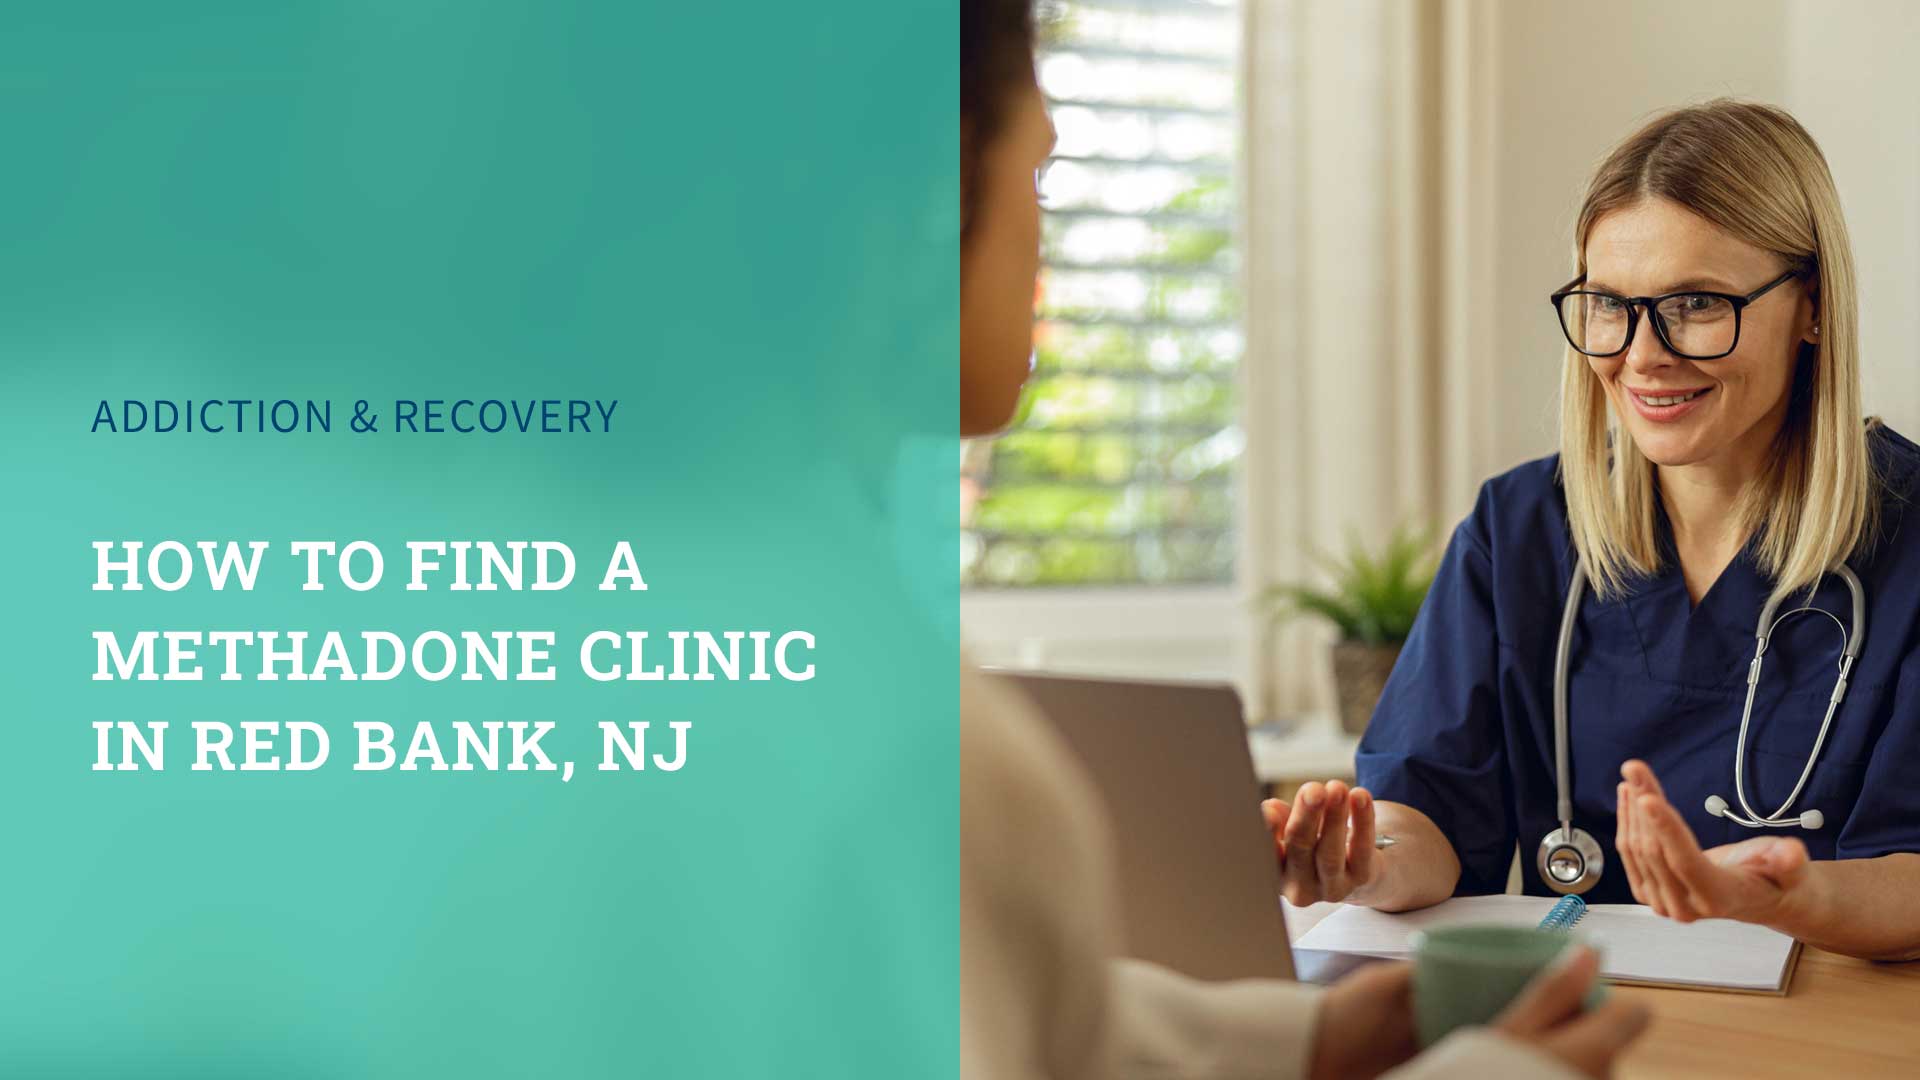 Finding a Methadone Clinic in Red Bank, NJ